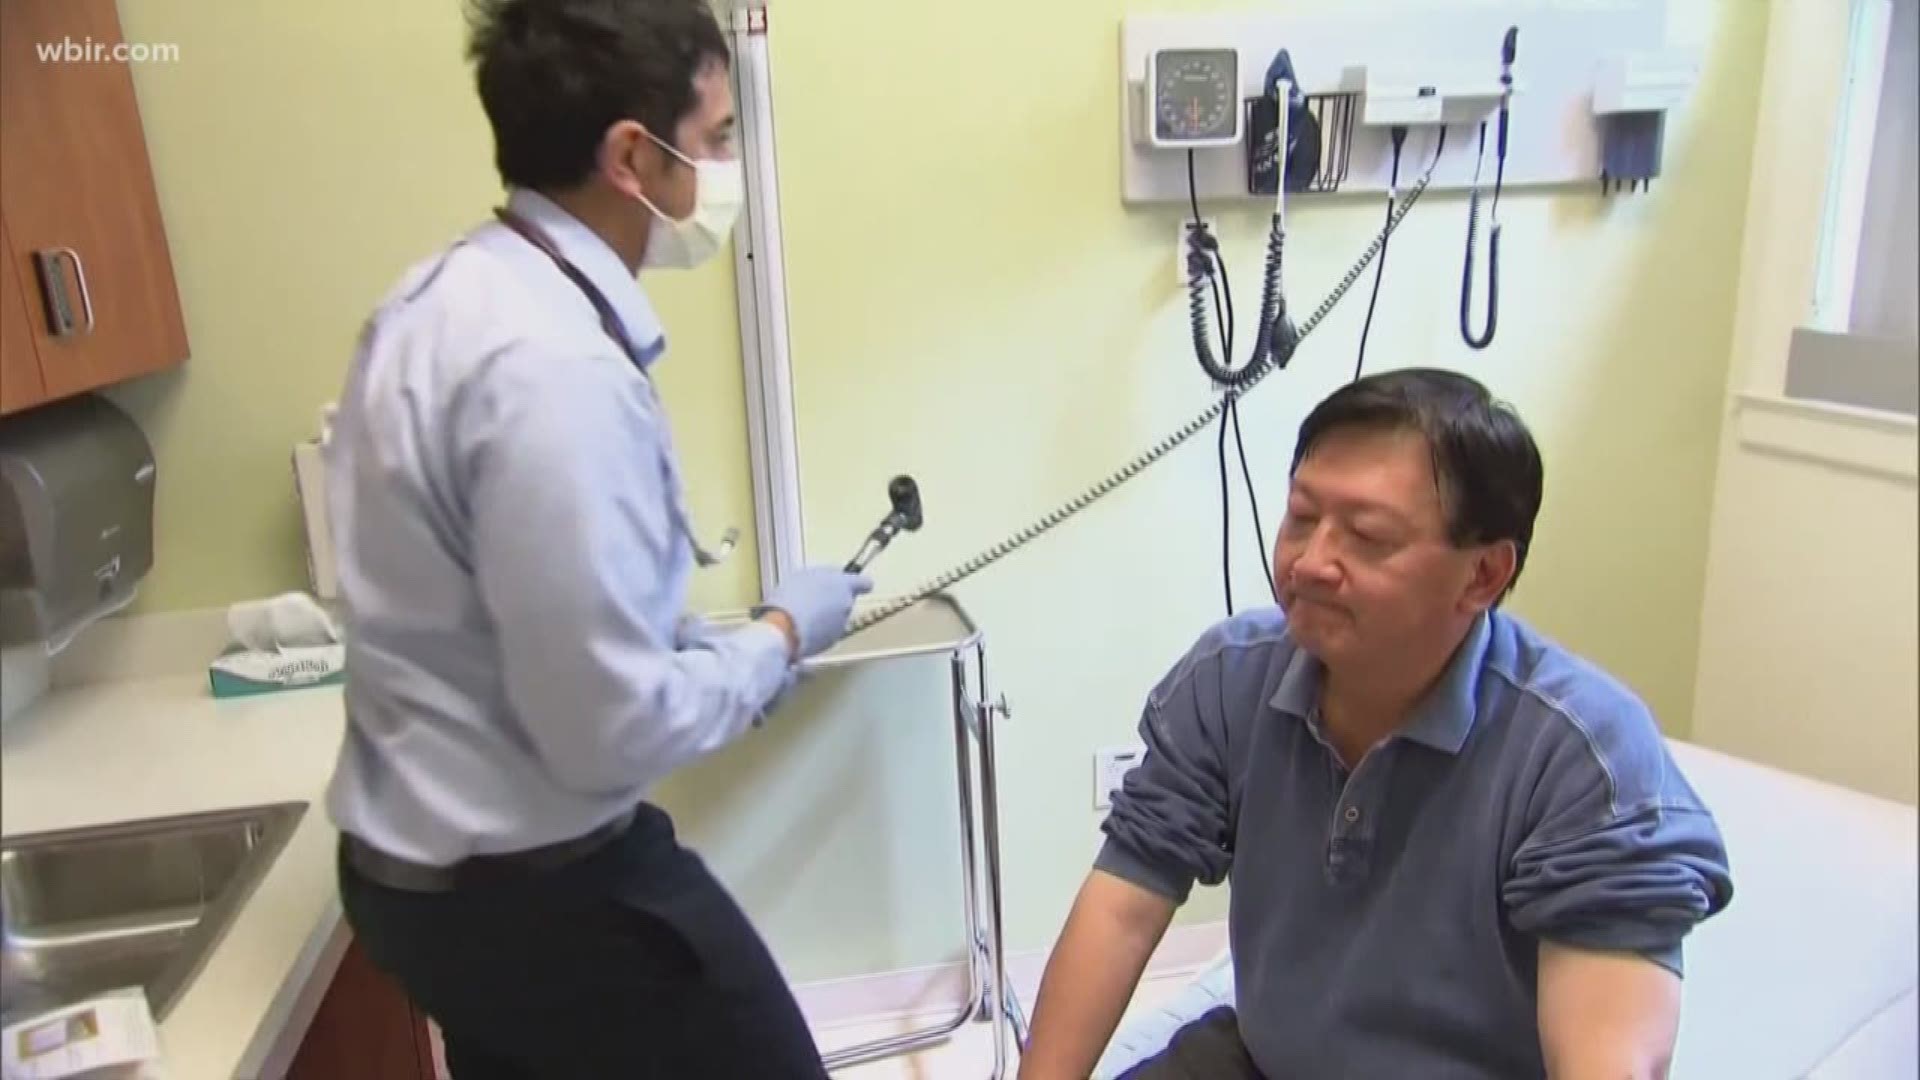 Flu season is looming and many people have the same misconceptions about the infection.